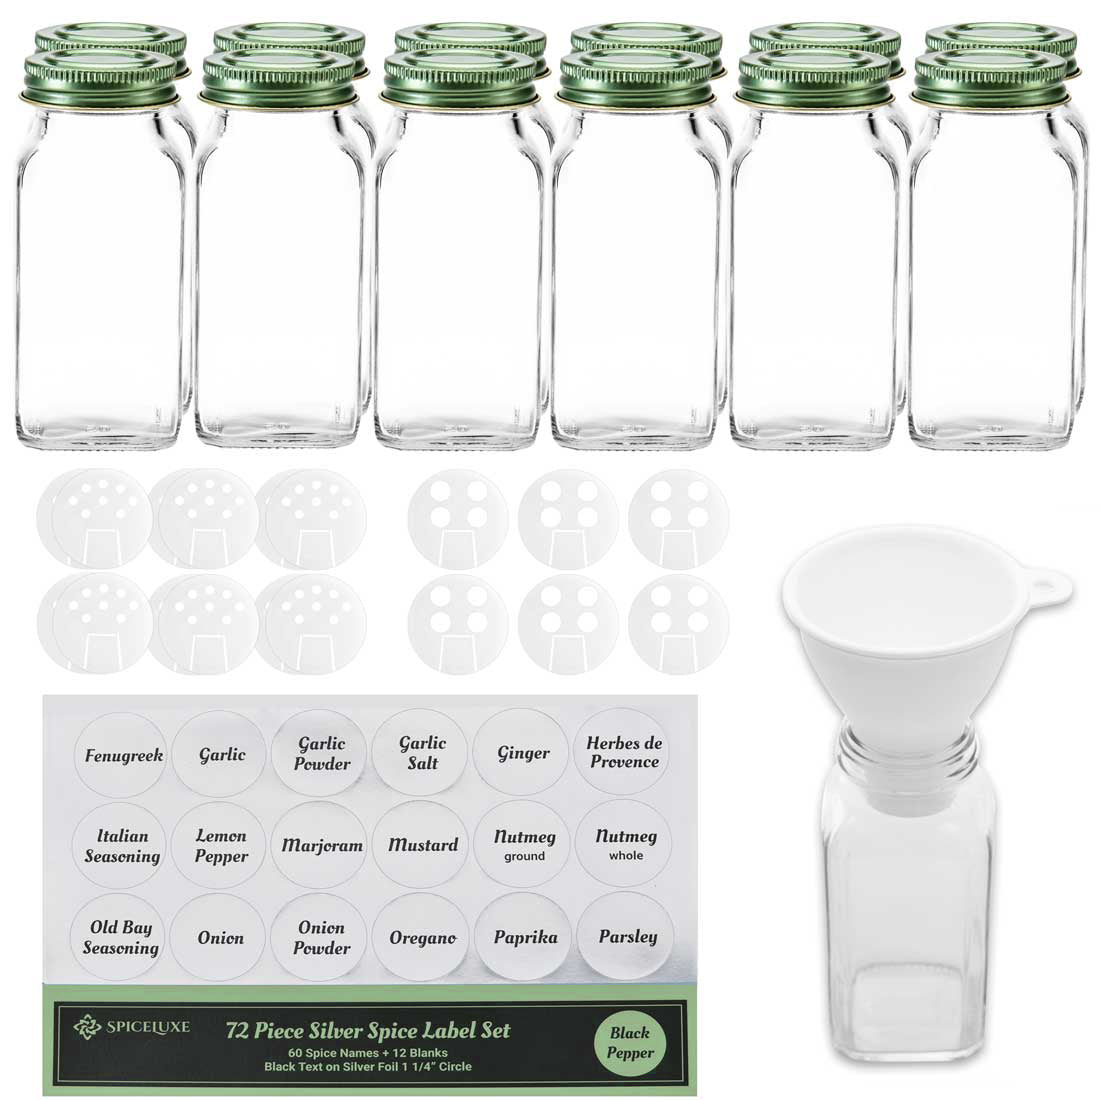 16 Pack 6 oz Glass Spice Jars with 80 Black Labels,180ml Empty